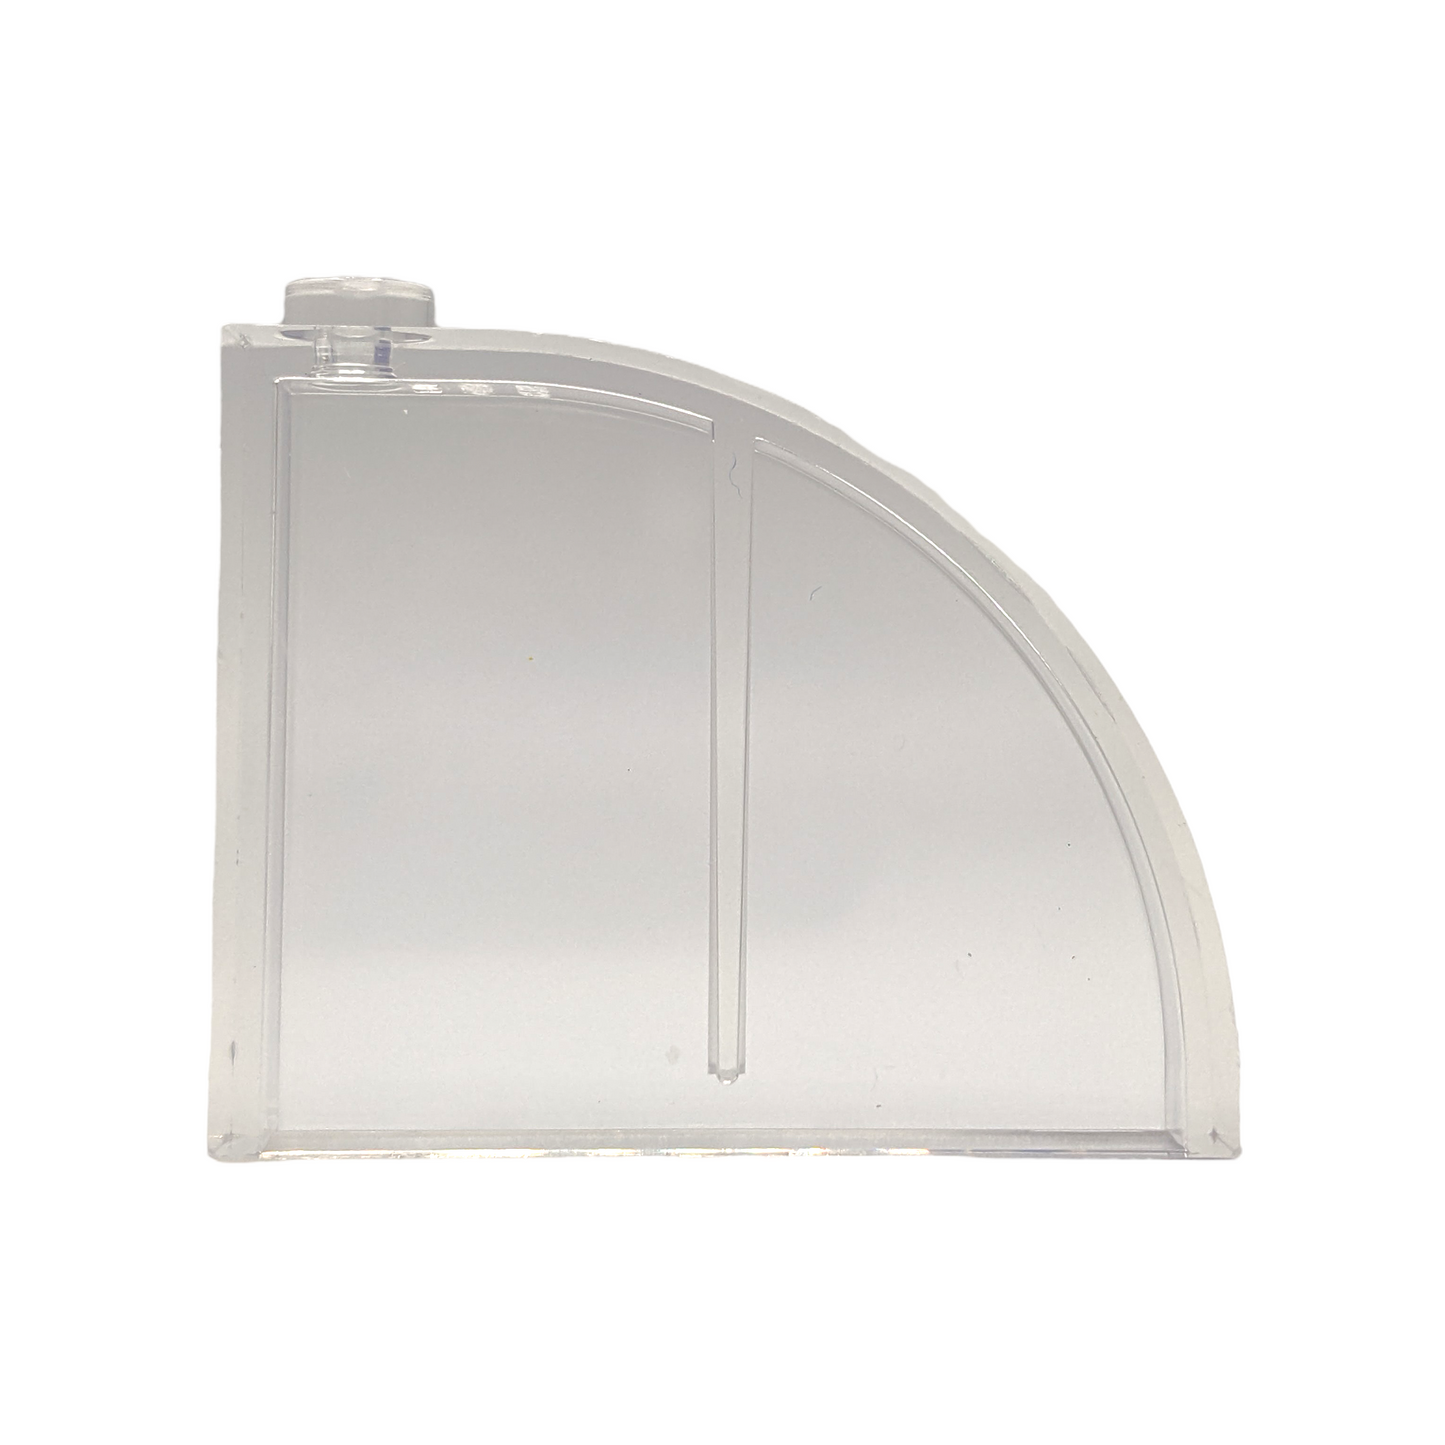 LEGO Slope Curved 4x1x2 2/3 - in Trans-Clear